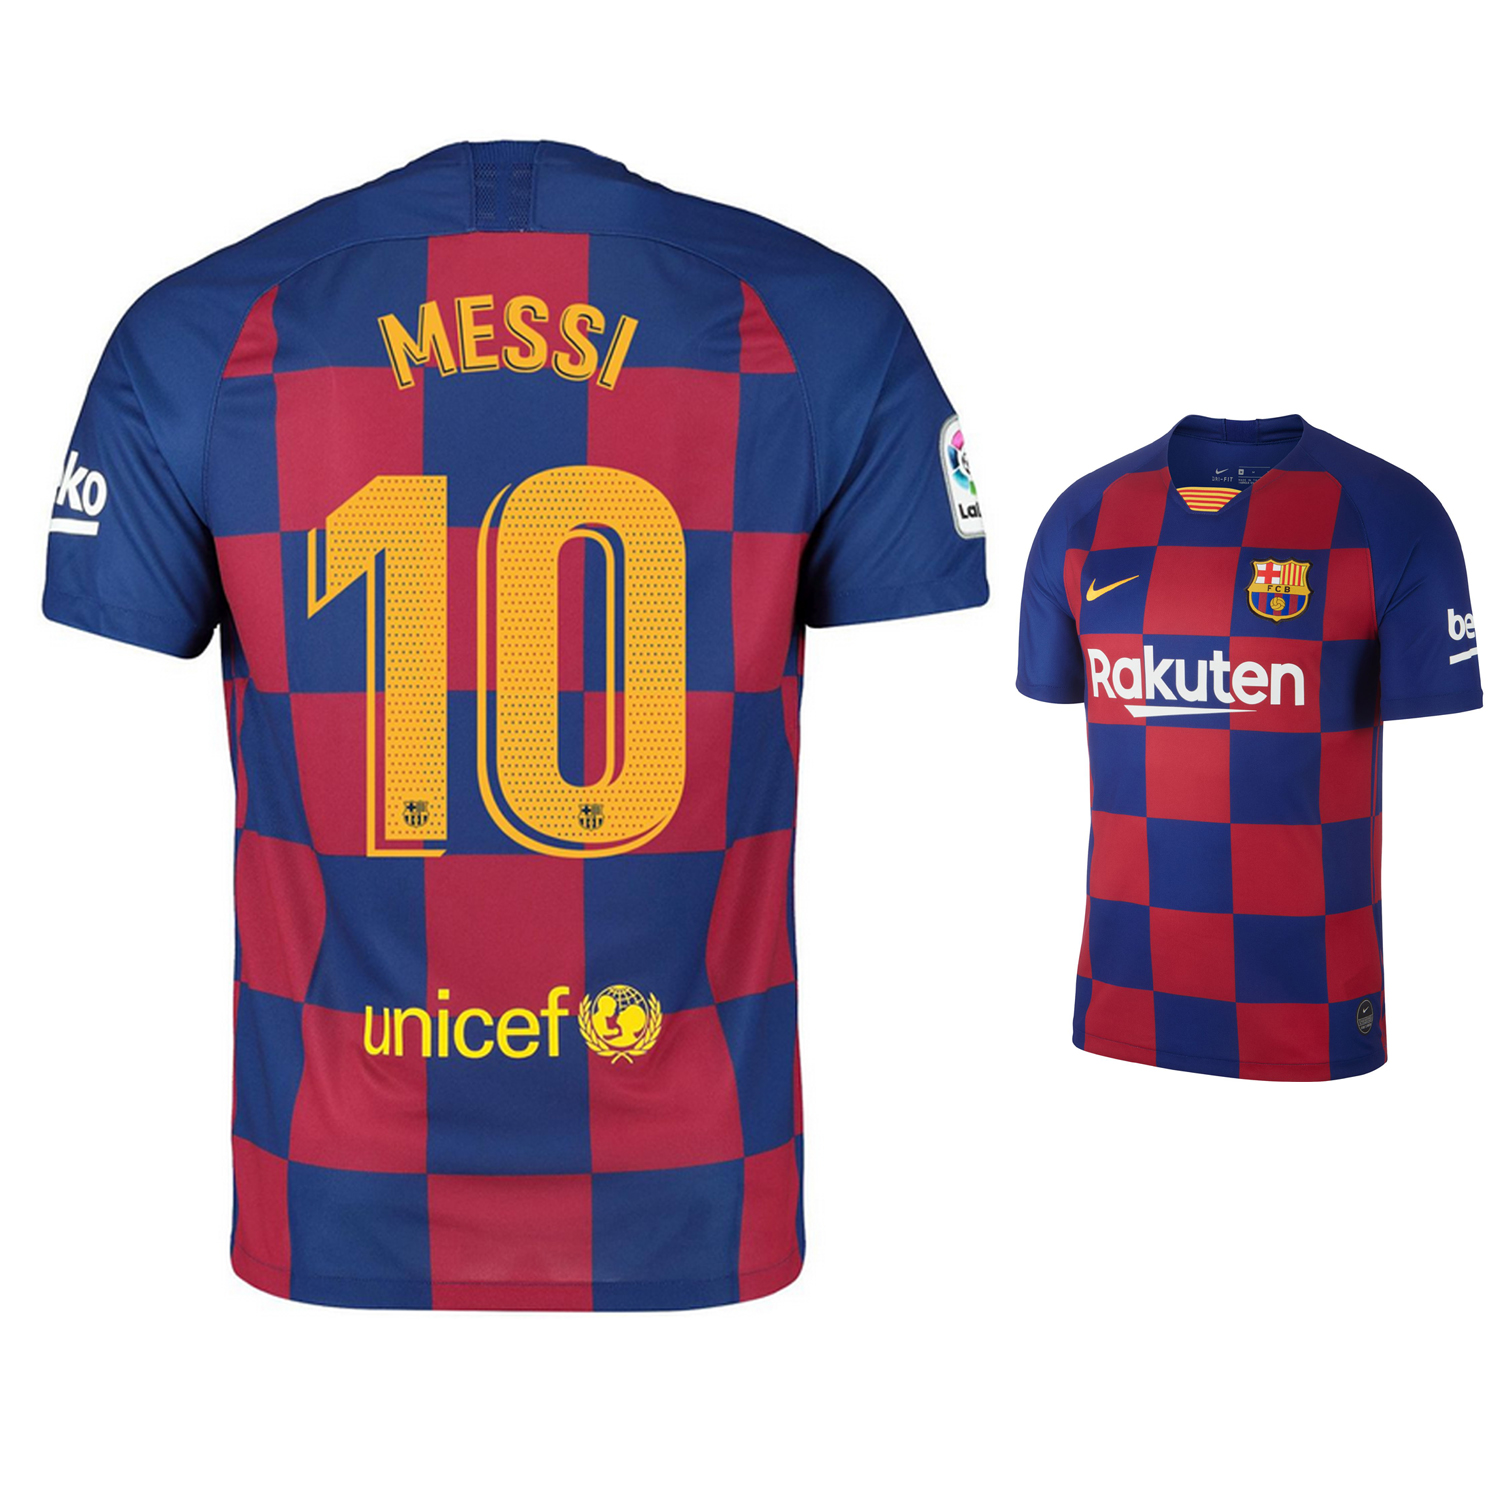 Nike Youth Barcelona Lionel Messi 10 Soccer Jersey Home